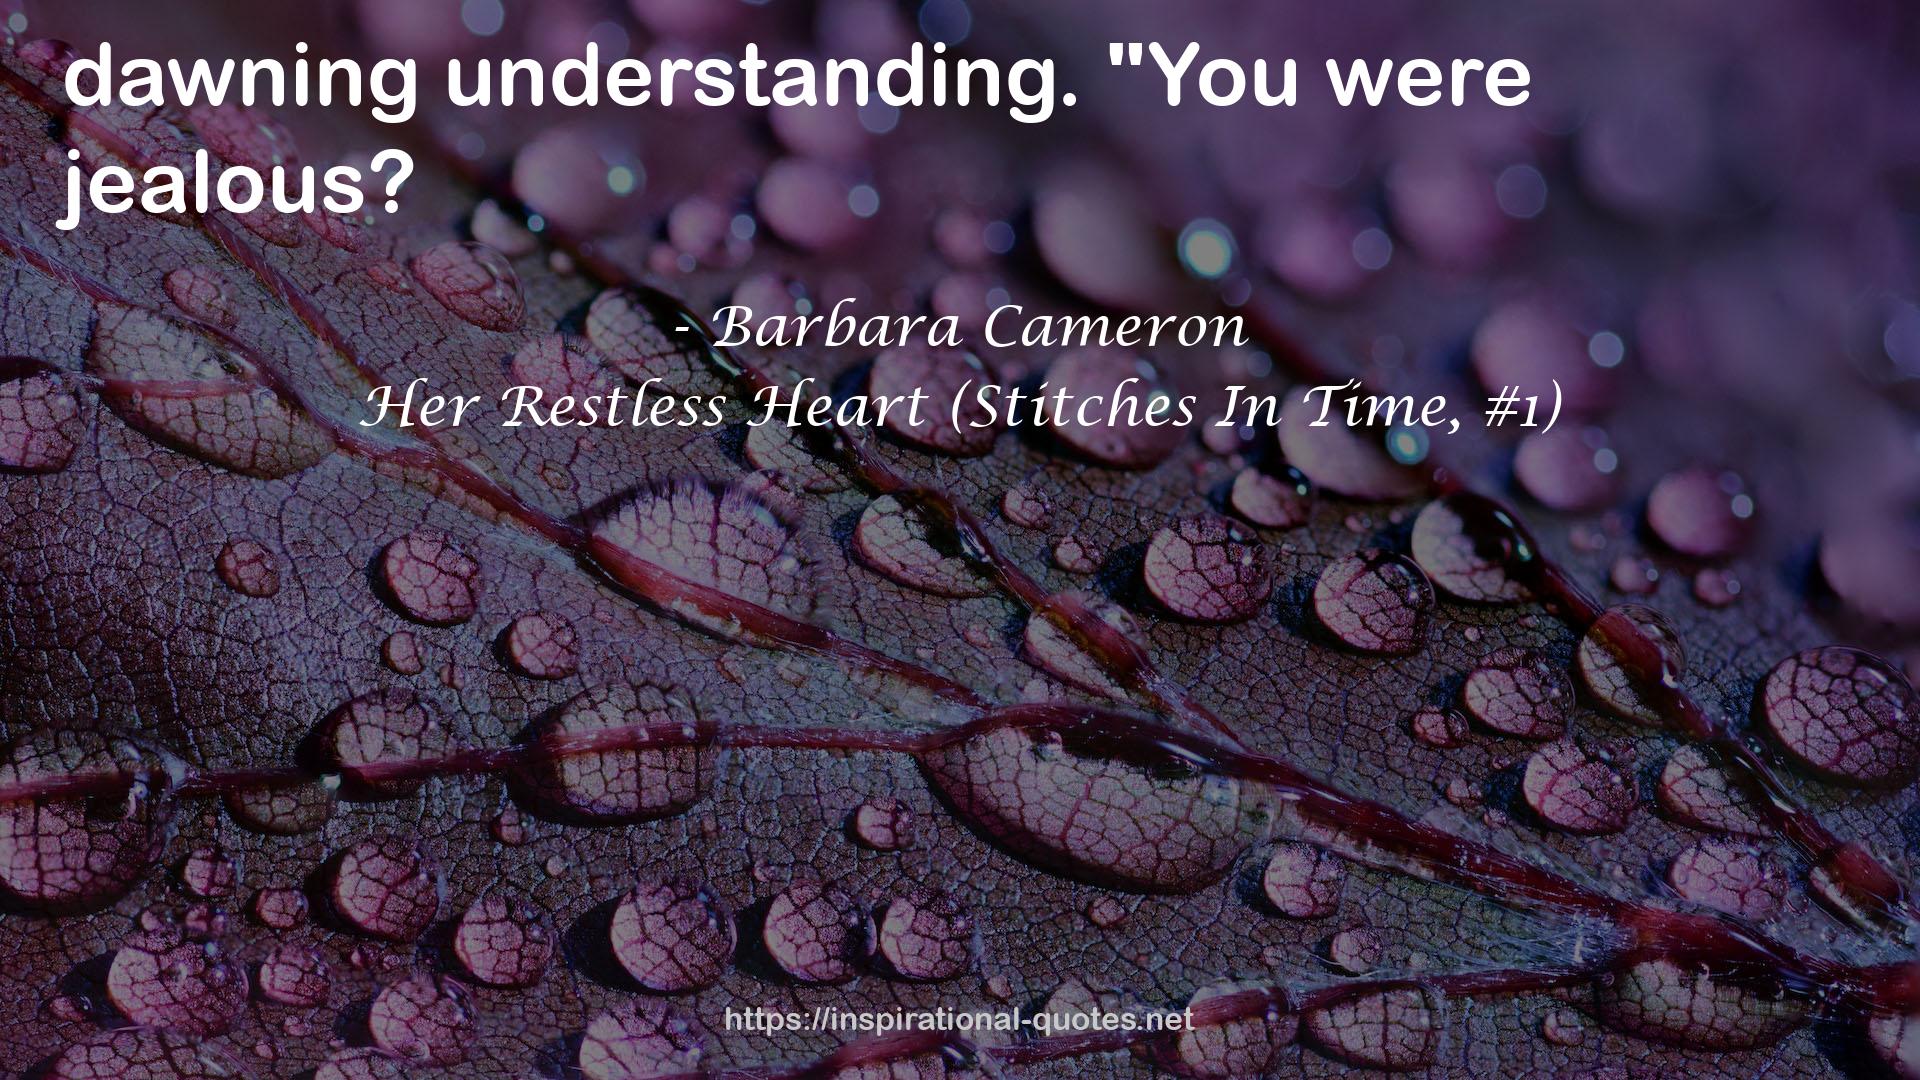 Her Restless Heart (Stitches In Time, #1) QUOTES